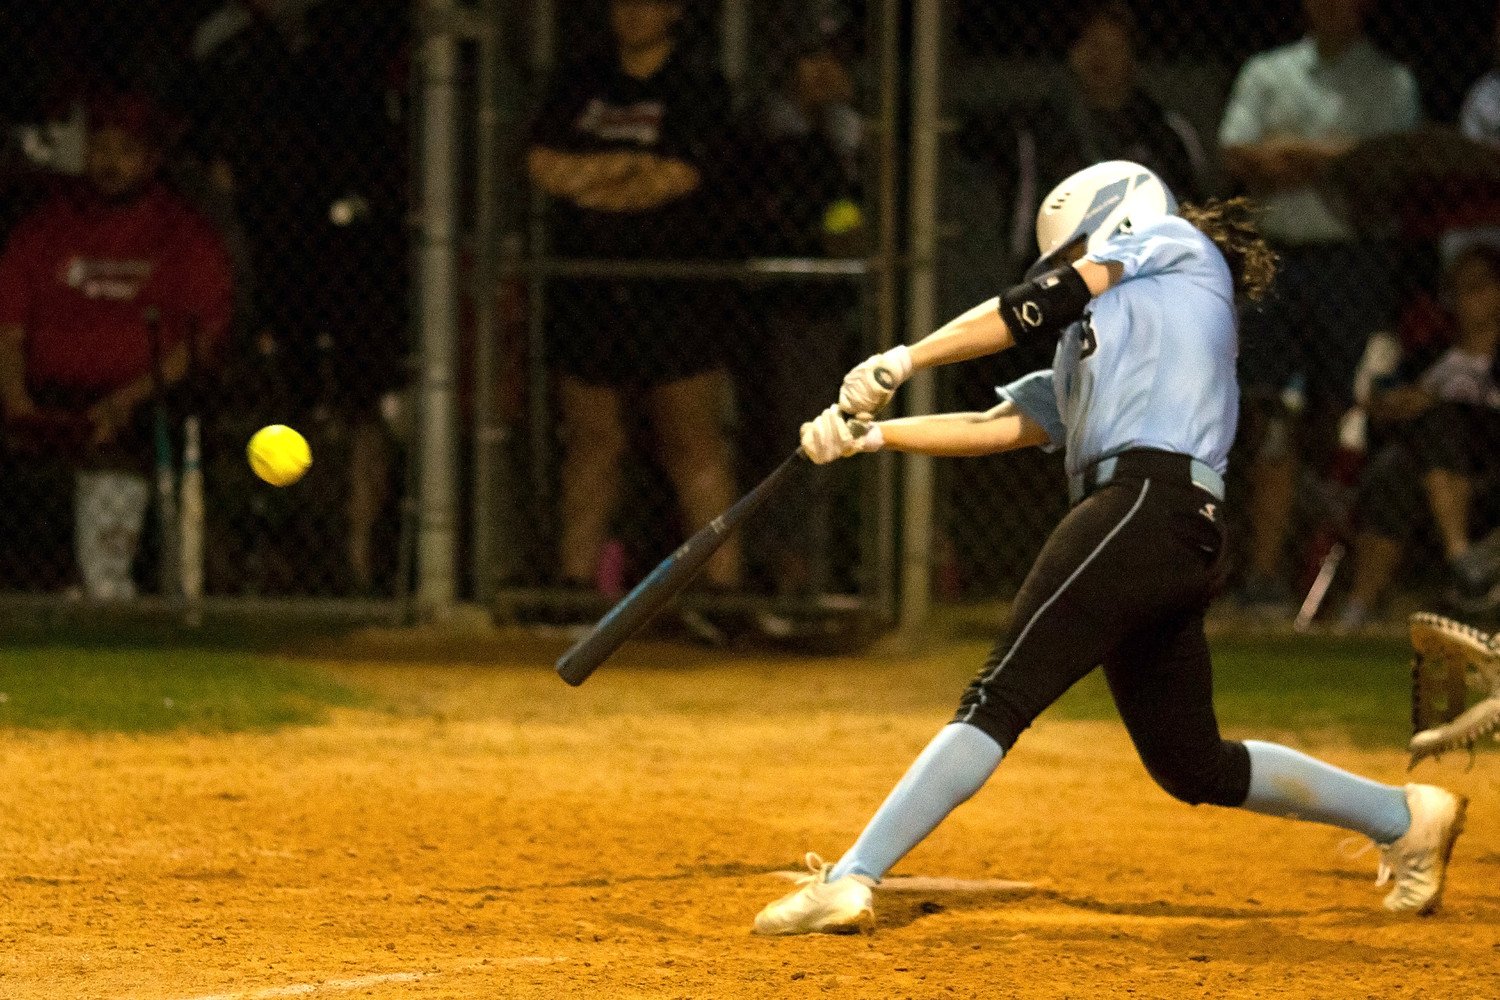 Michelle Leone delivers a base hit to drive in the Sharks only run